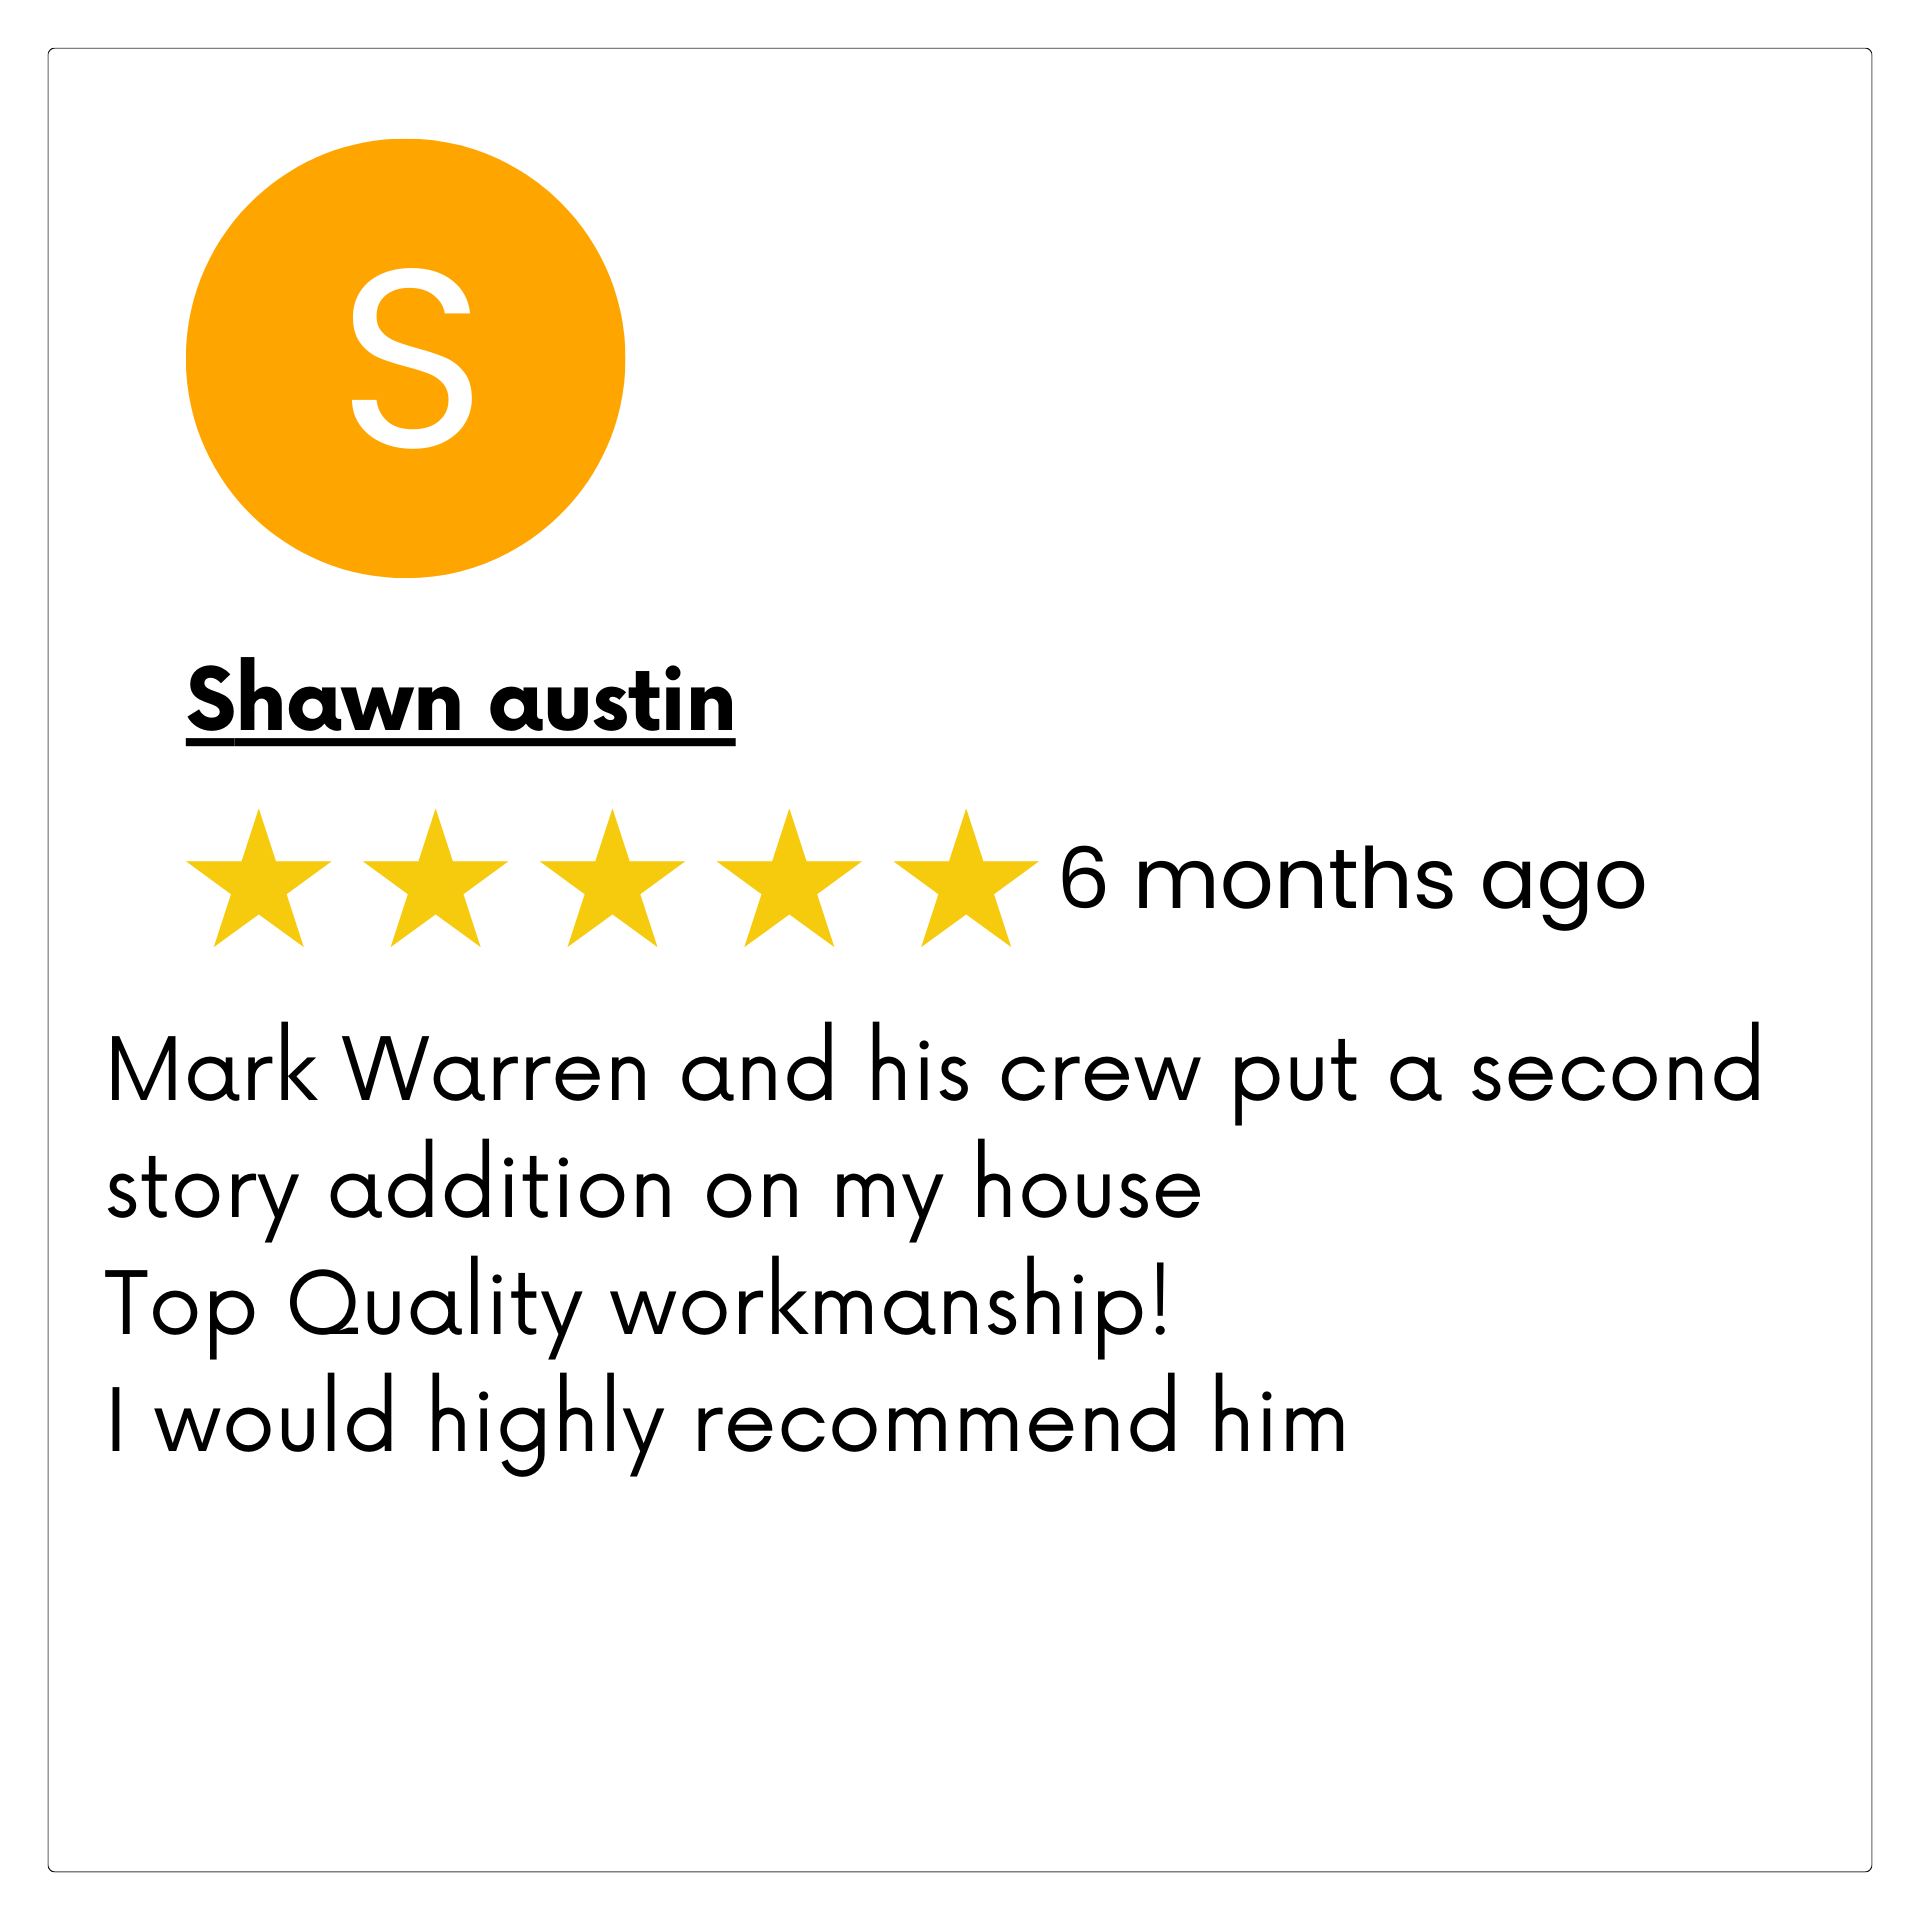 A shawn austin review of mark warren and his crew put a second story addition on my house.